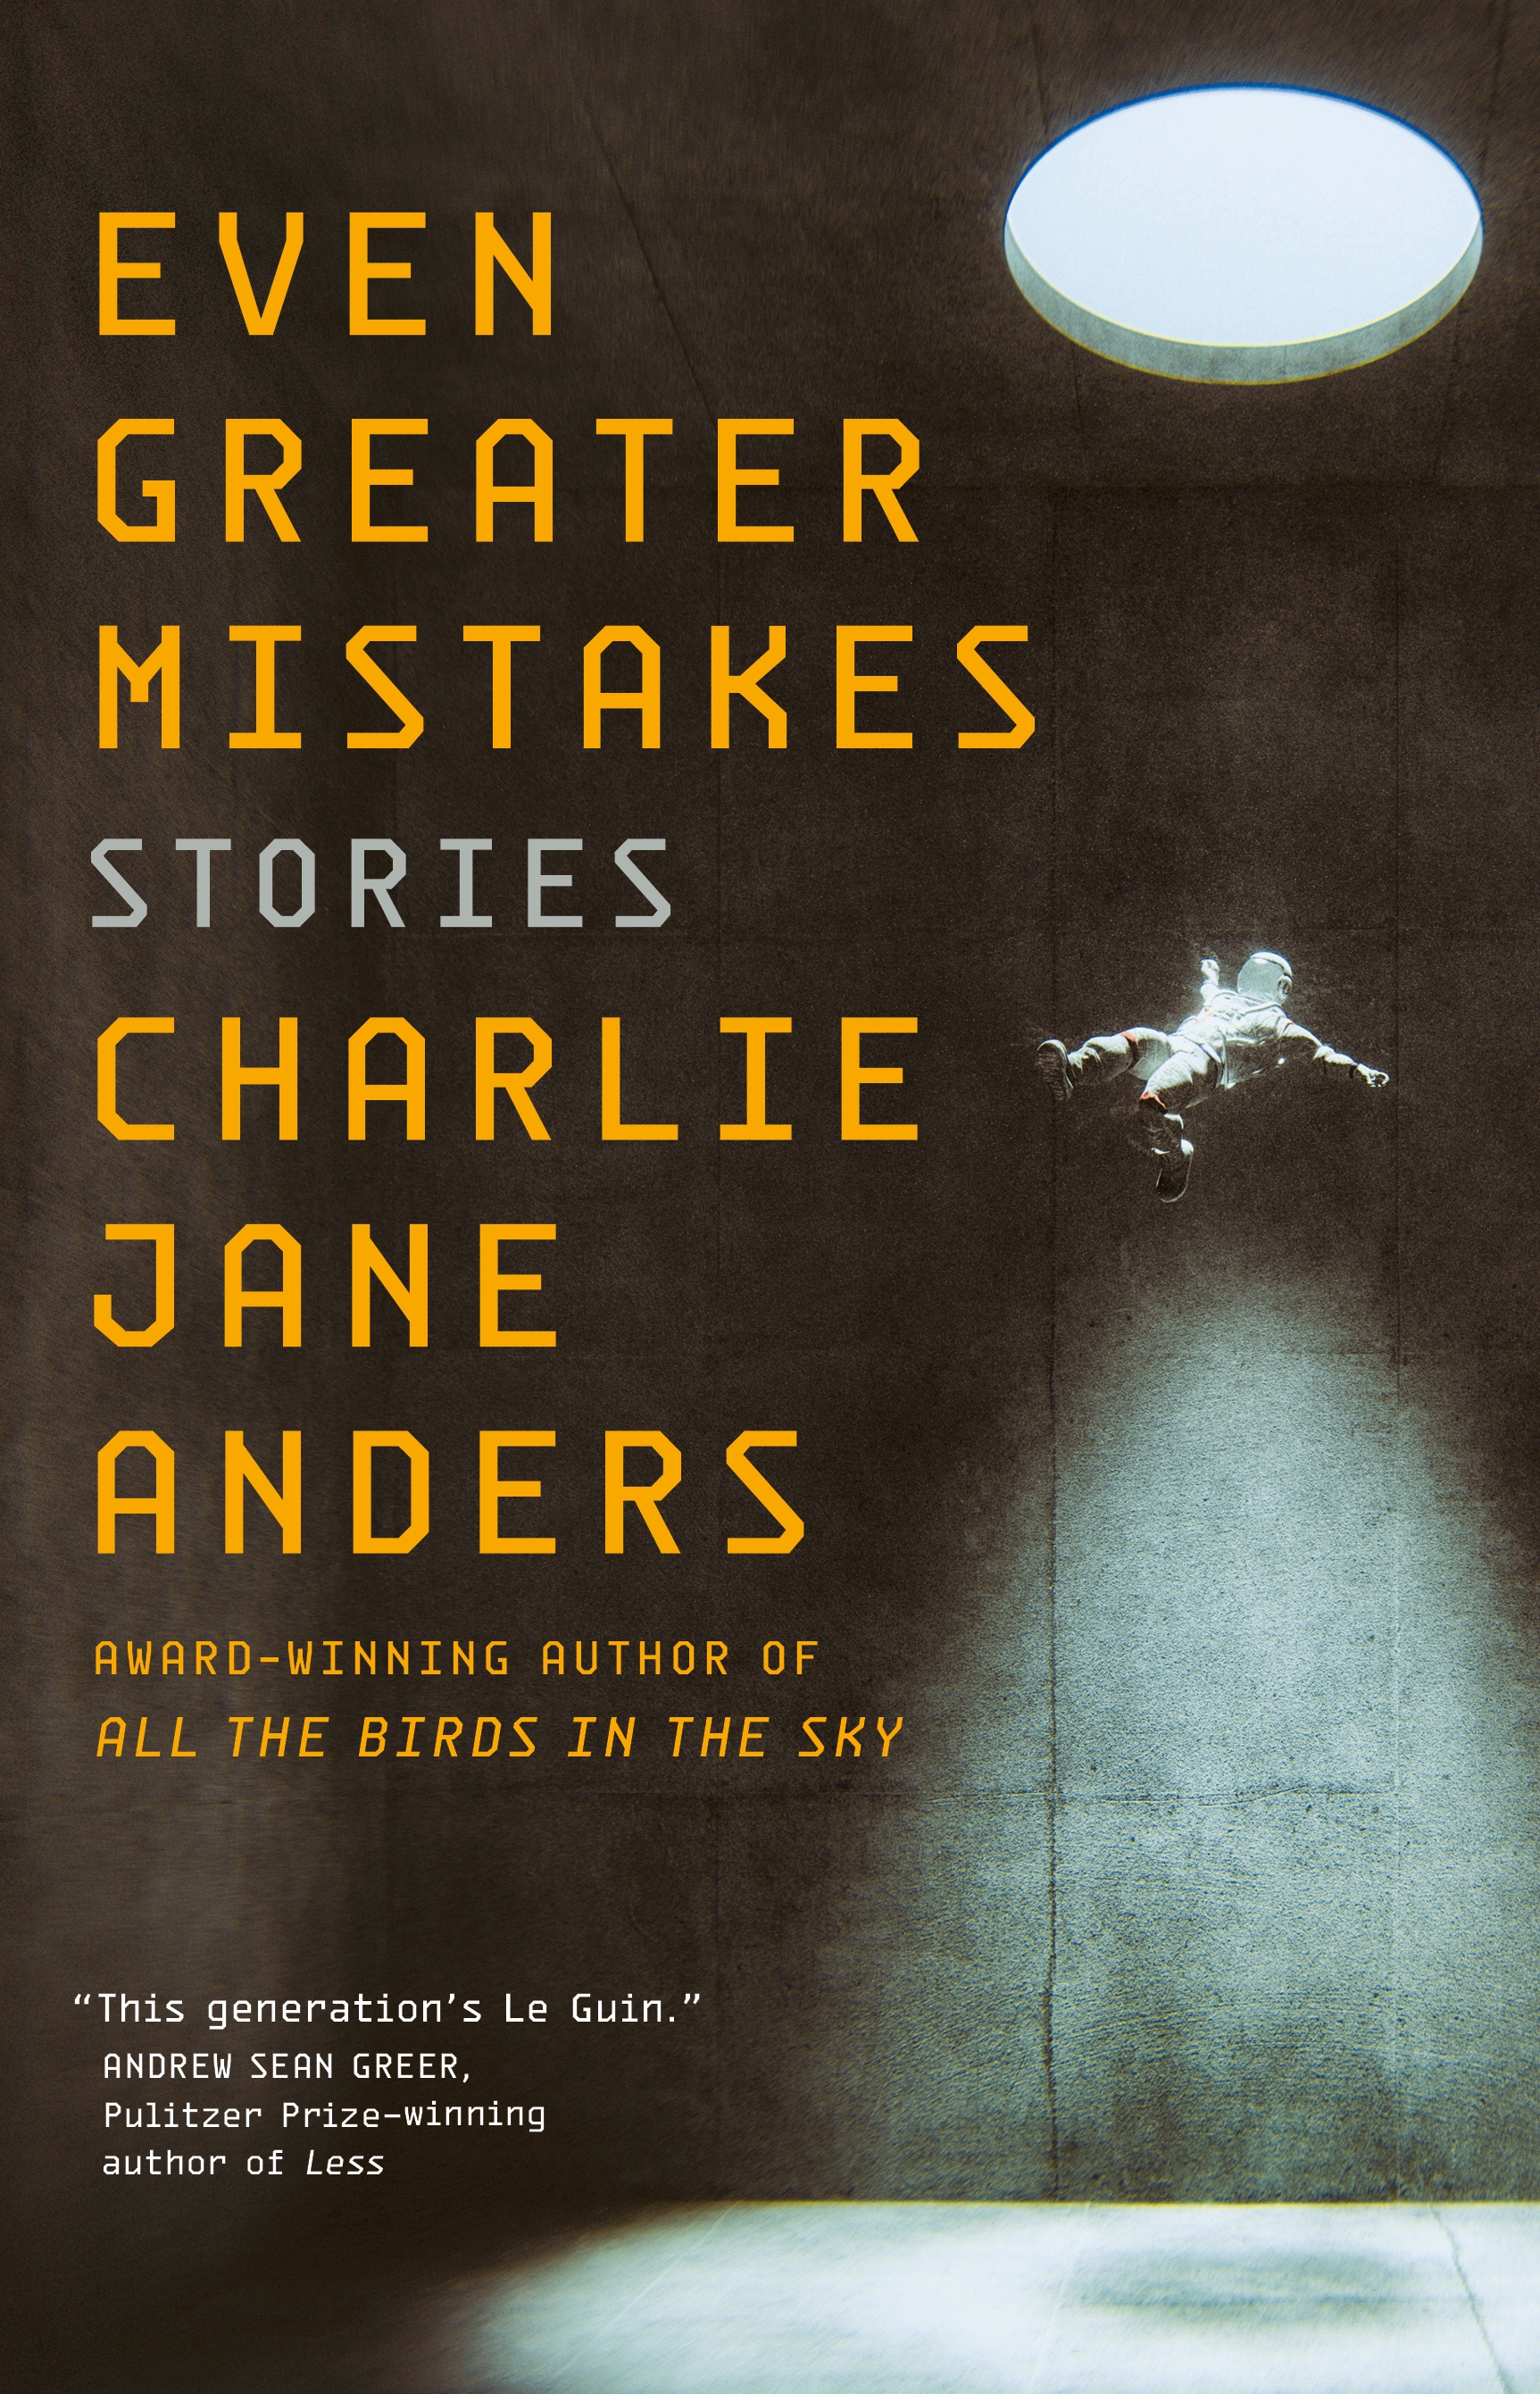 Even Greater Mistakes : Stories by Charlie Jane Anders